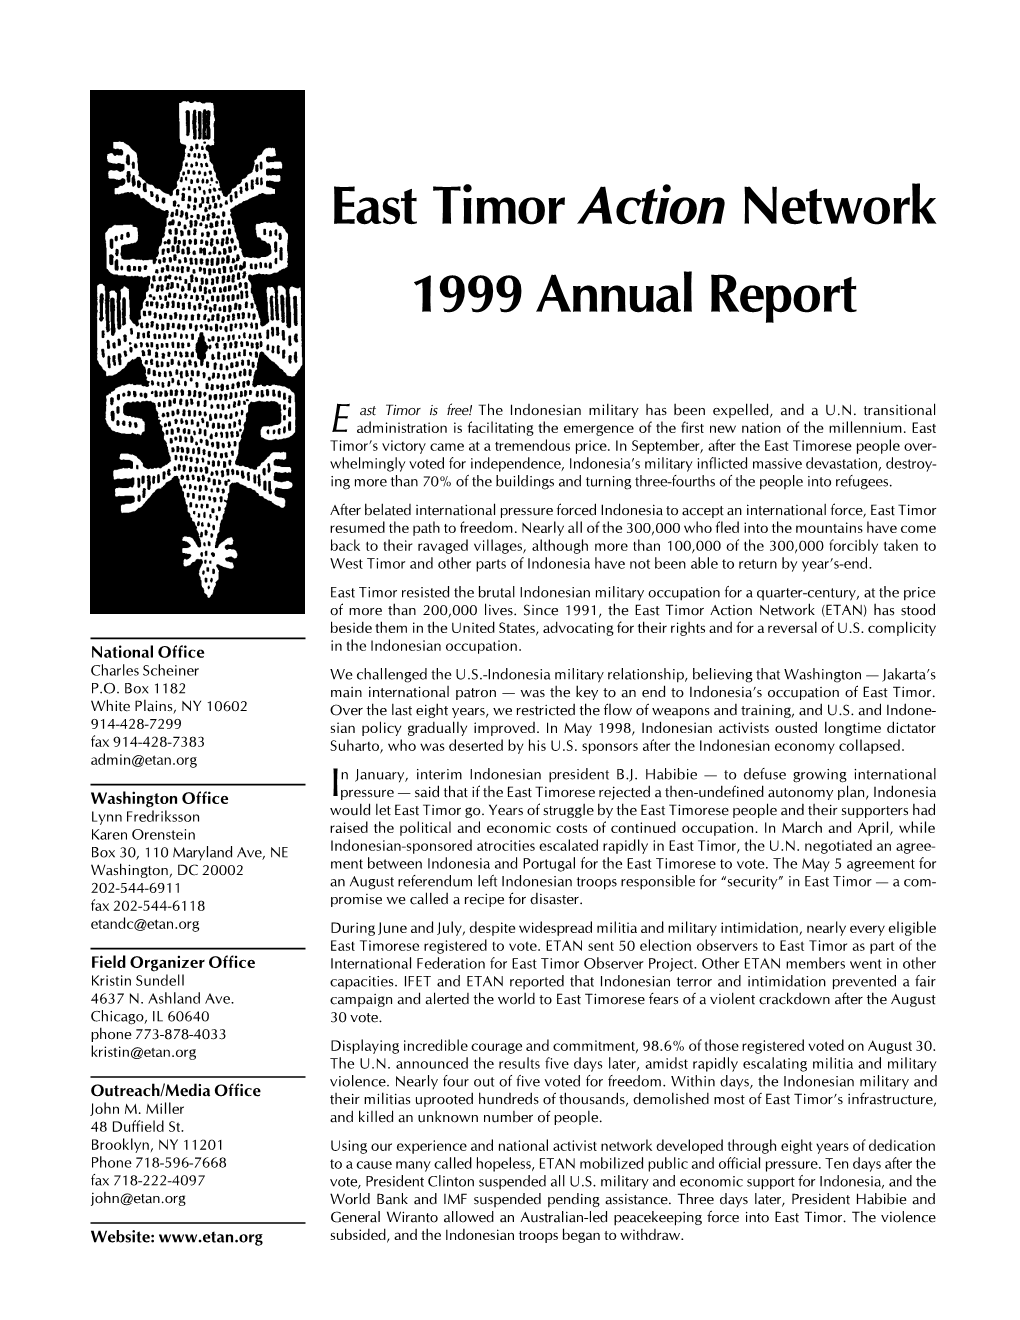 East Timor Action Network 1999 Annual Report